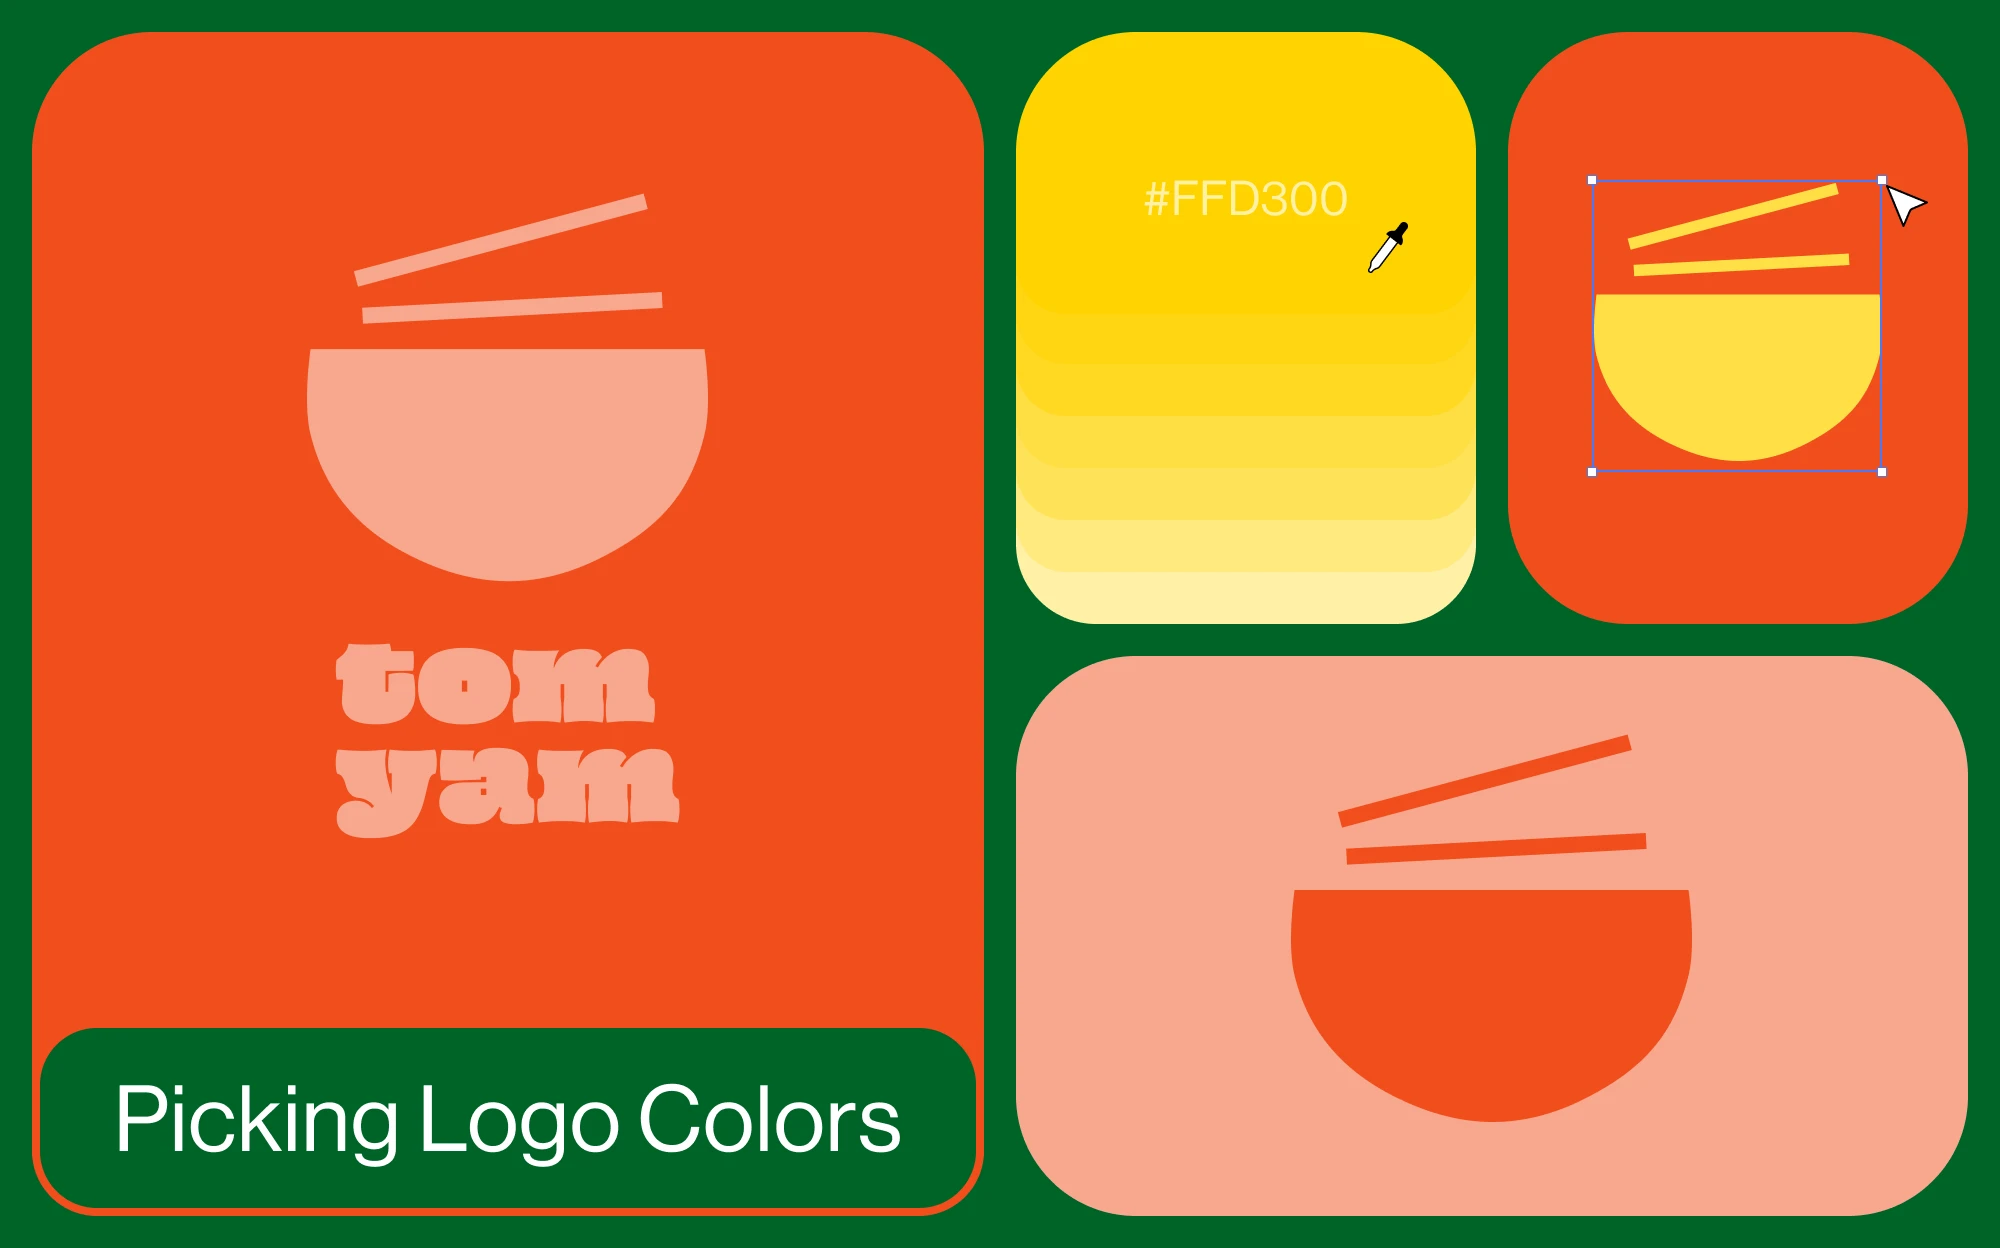 Picking Logo Colors for Your Brand: The Basics